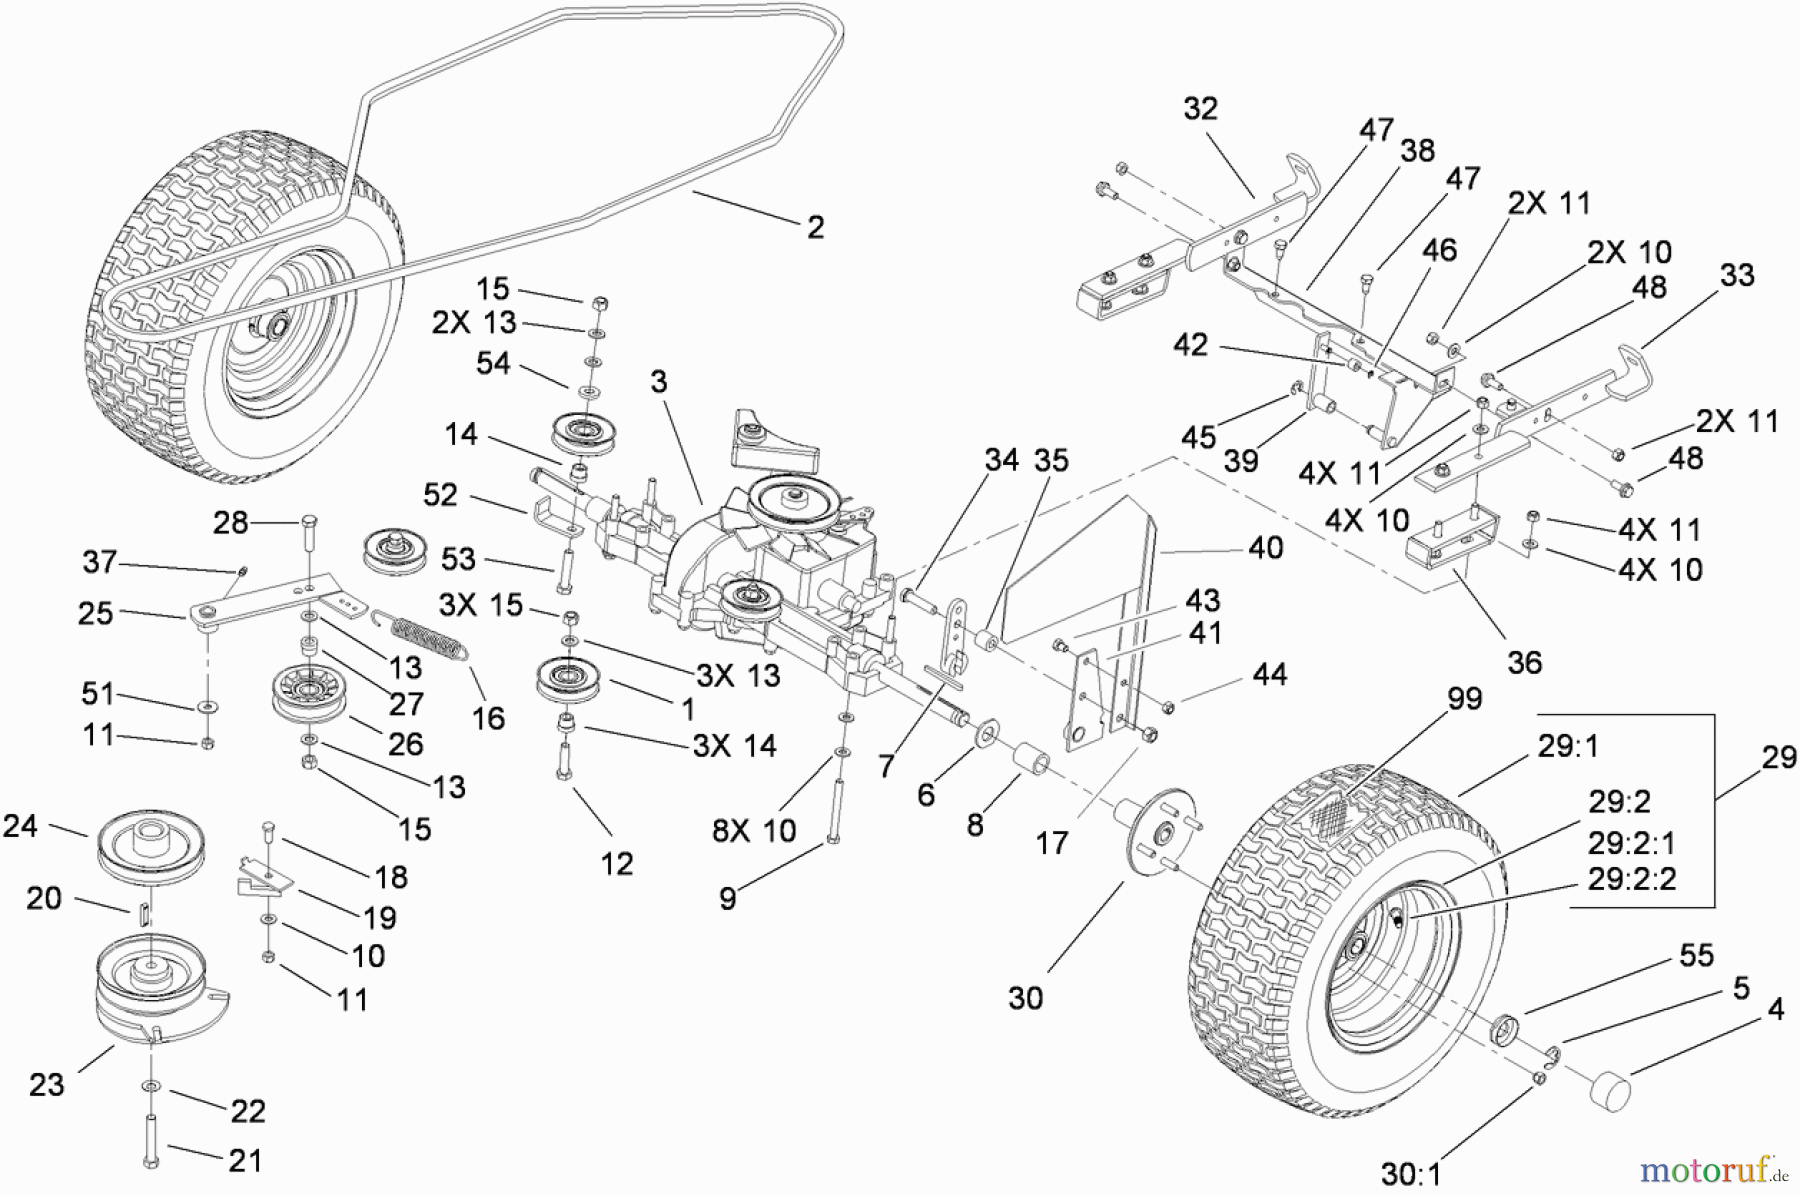  Toro Neu Mowers, Lawn & Garden Tractor Seite 1 74593 (DH 220) - Toro DH 220 Lawn Tractor, 2010 (310000001-310999999) TRANSMISSION ASSEMBLY